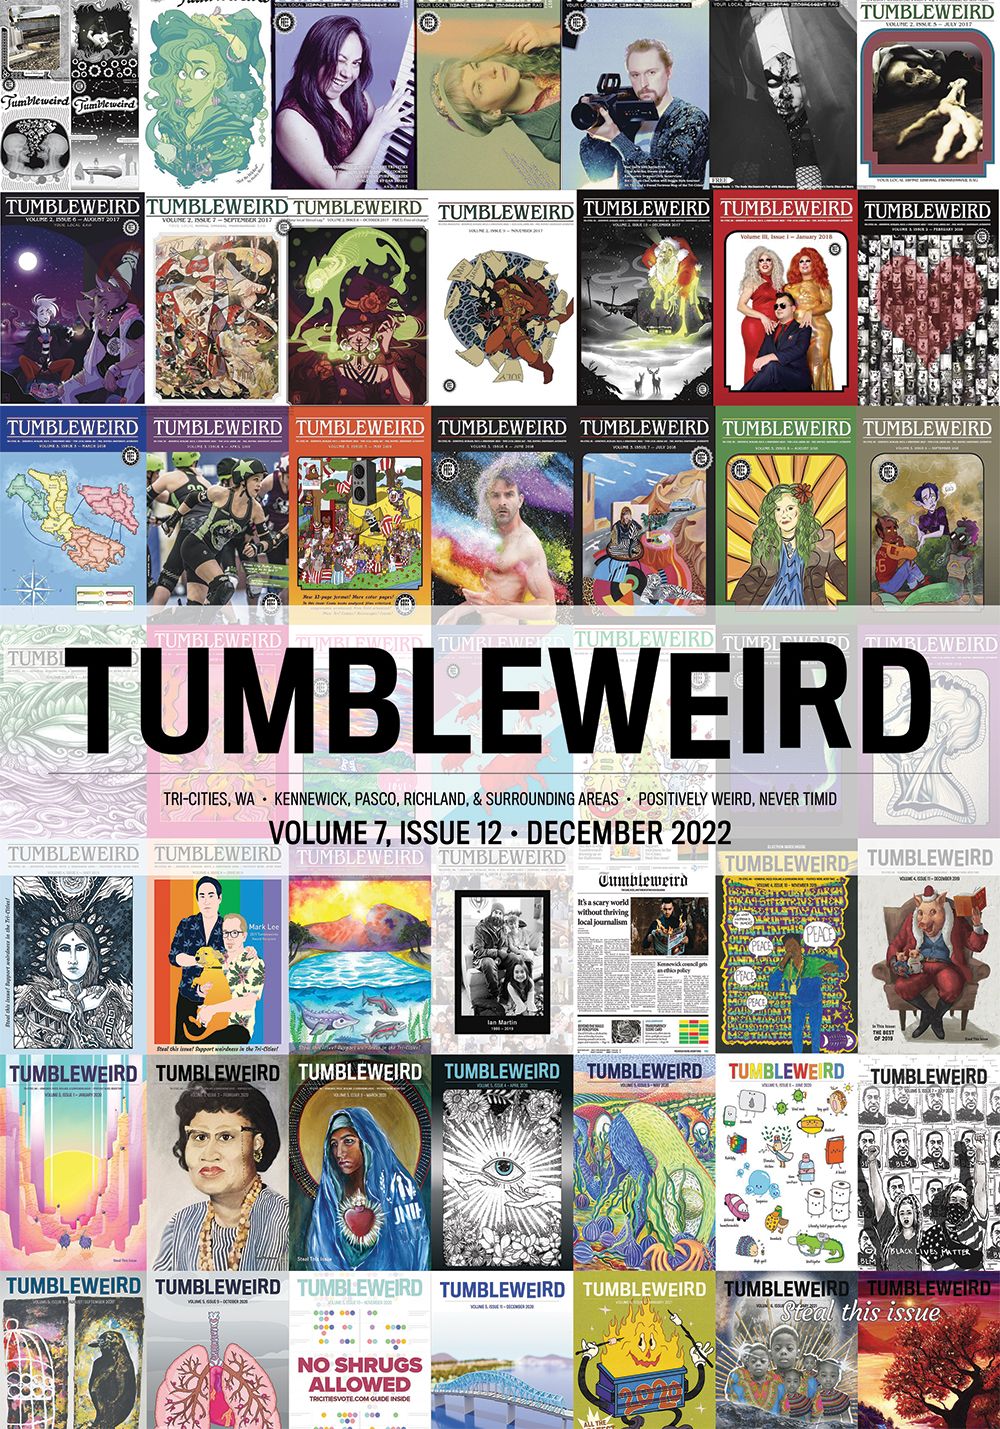 "TUMBLEWEIRD: TRI-CITIES, WA • KENNEWICK, PASCO, RICHLAND, & SURROUNDING AREA • POSITIVELY WEIRD, NEVER TIMID; VOLUME 7, ISSUE 12 • DECEMBER 2022" Image shows a collage of past covers of Tumbleweird.